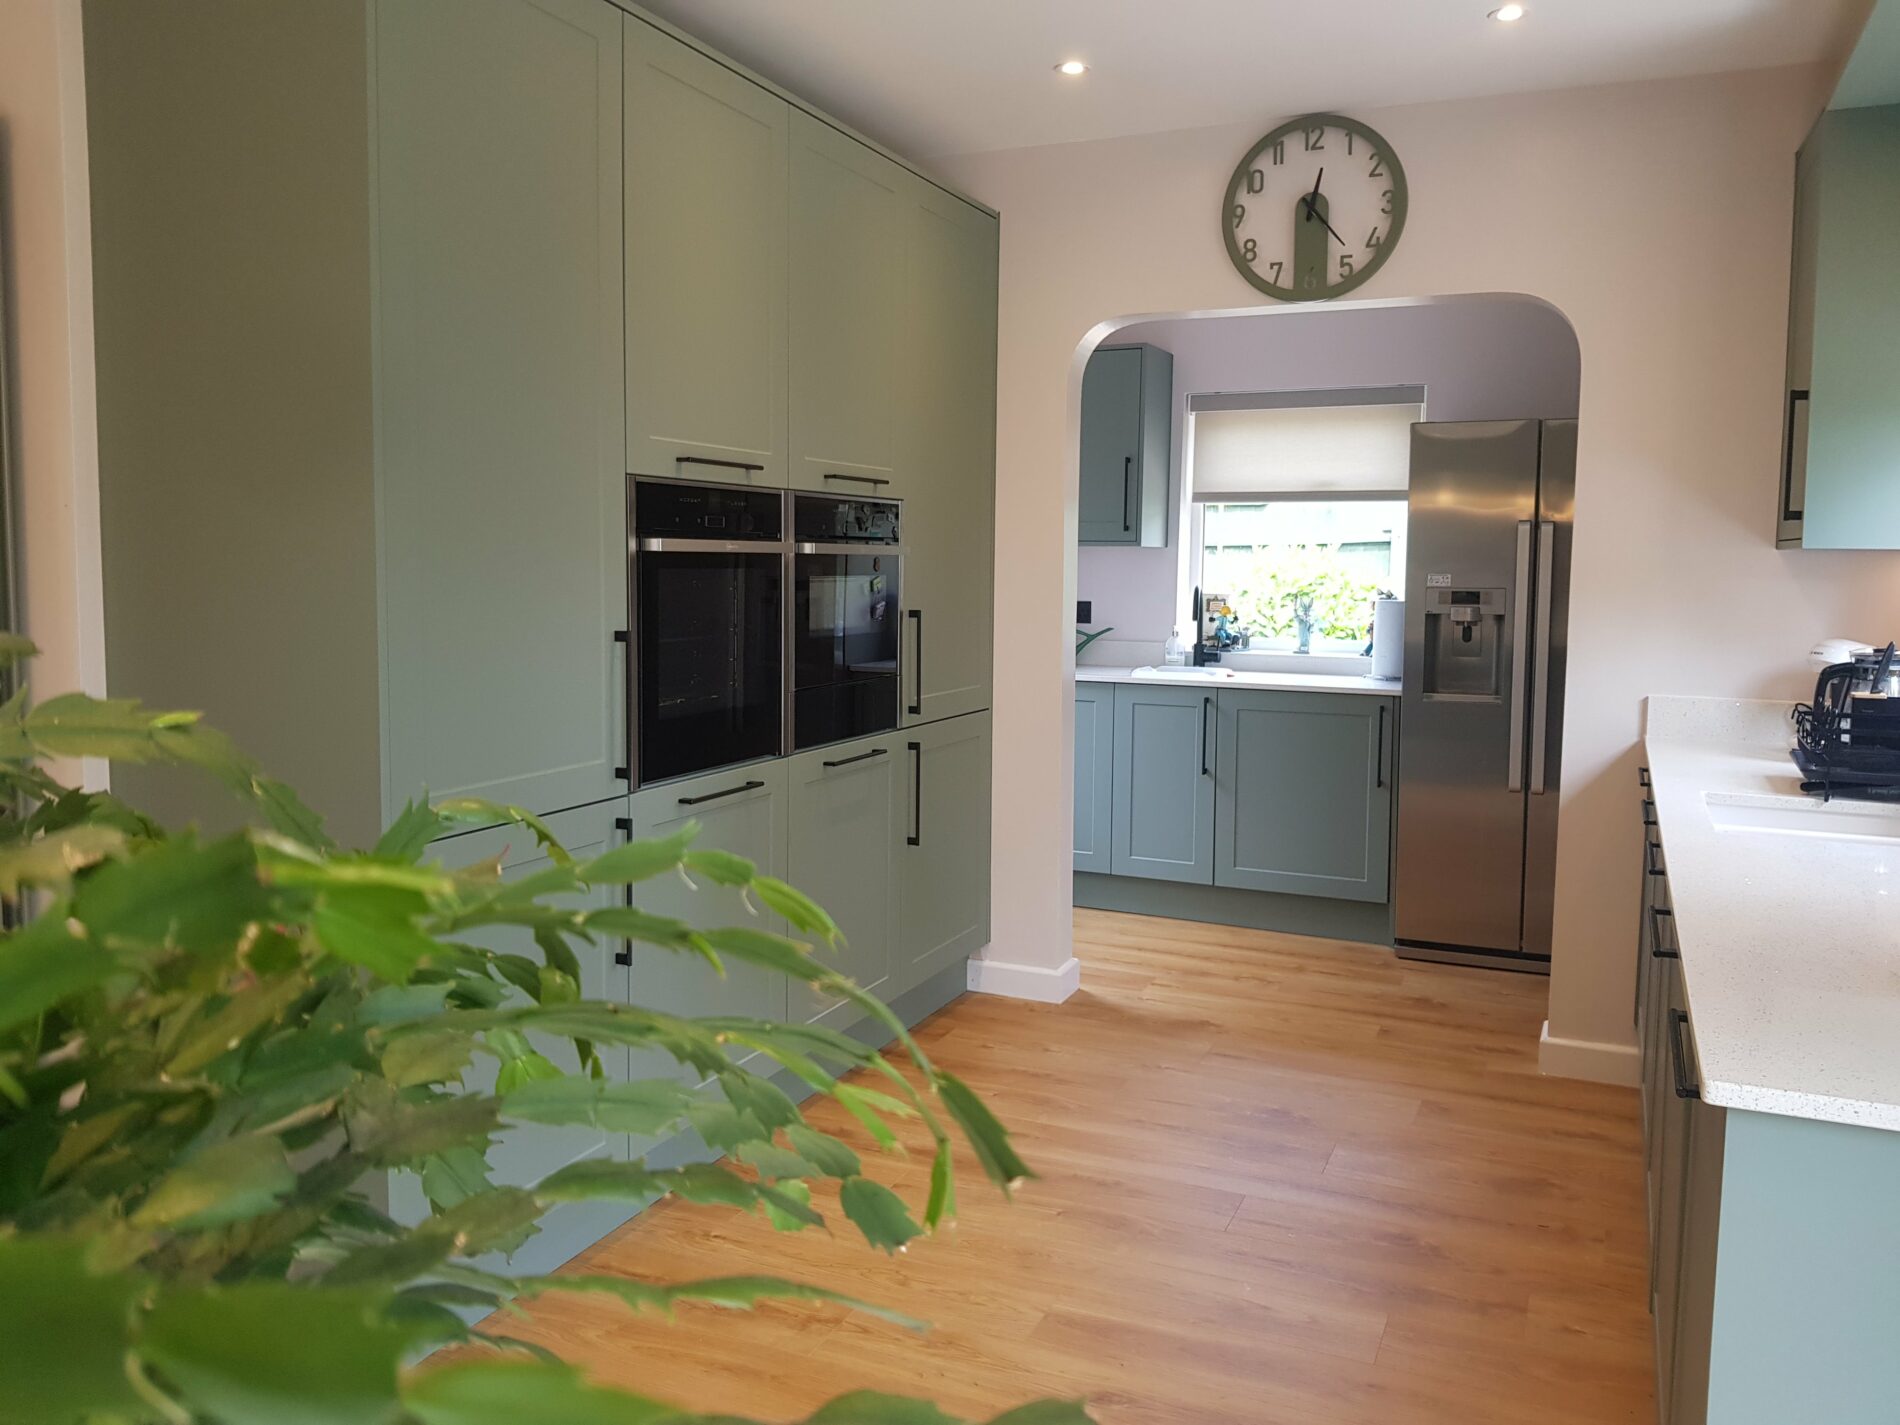 Kitchen company in Talbot Woods